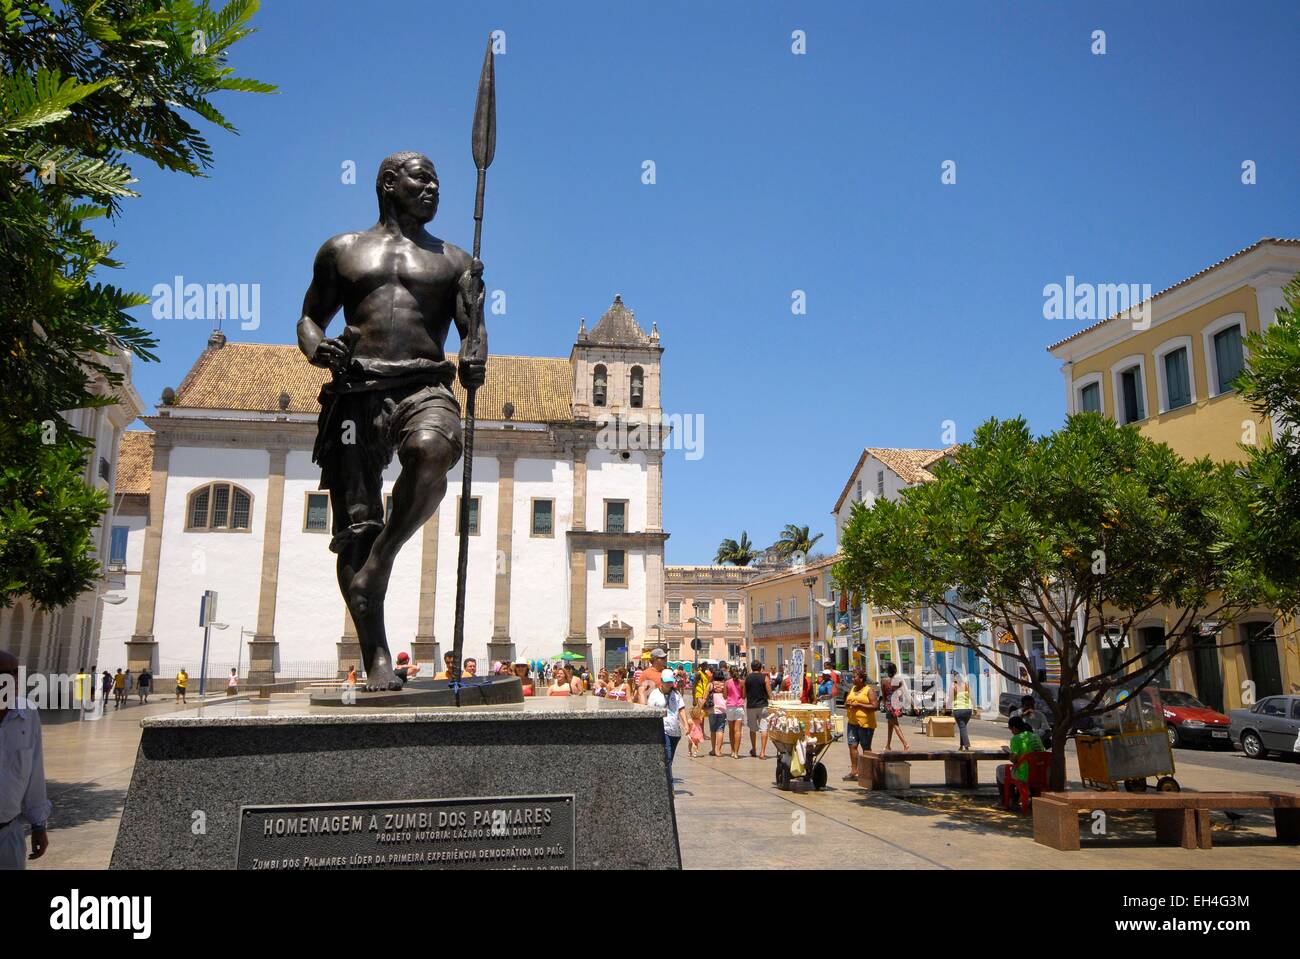 Brazil, Bahia state, Salvador de Bahia, historical center listed as World Heritage by UNESCO, Pelourinho district, Praca da Se, memorial tribute to Zumbi who was one of the most important warlords autonomous realm of Palmares, founded in the 17th century Stock Photo